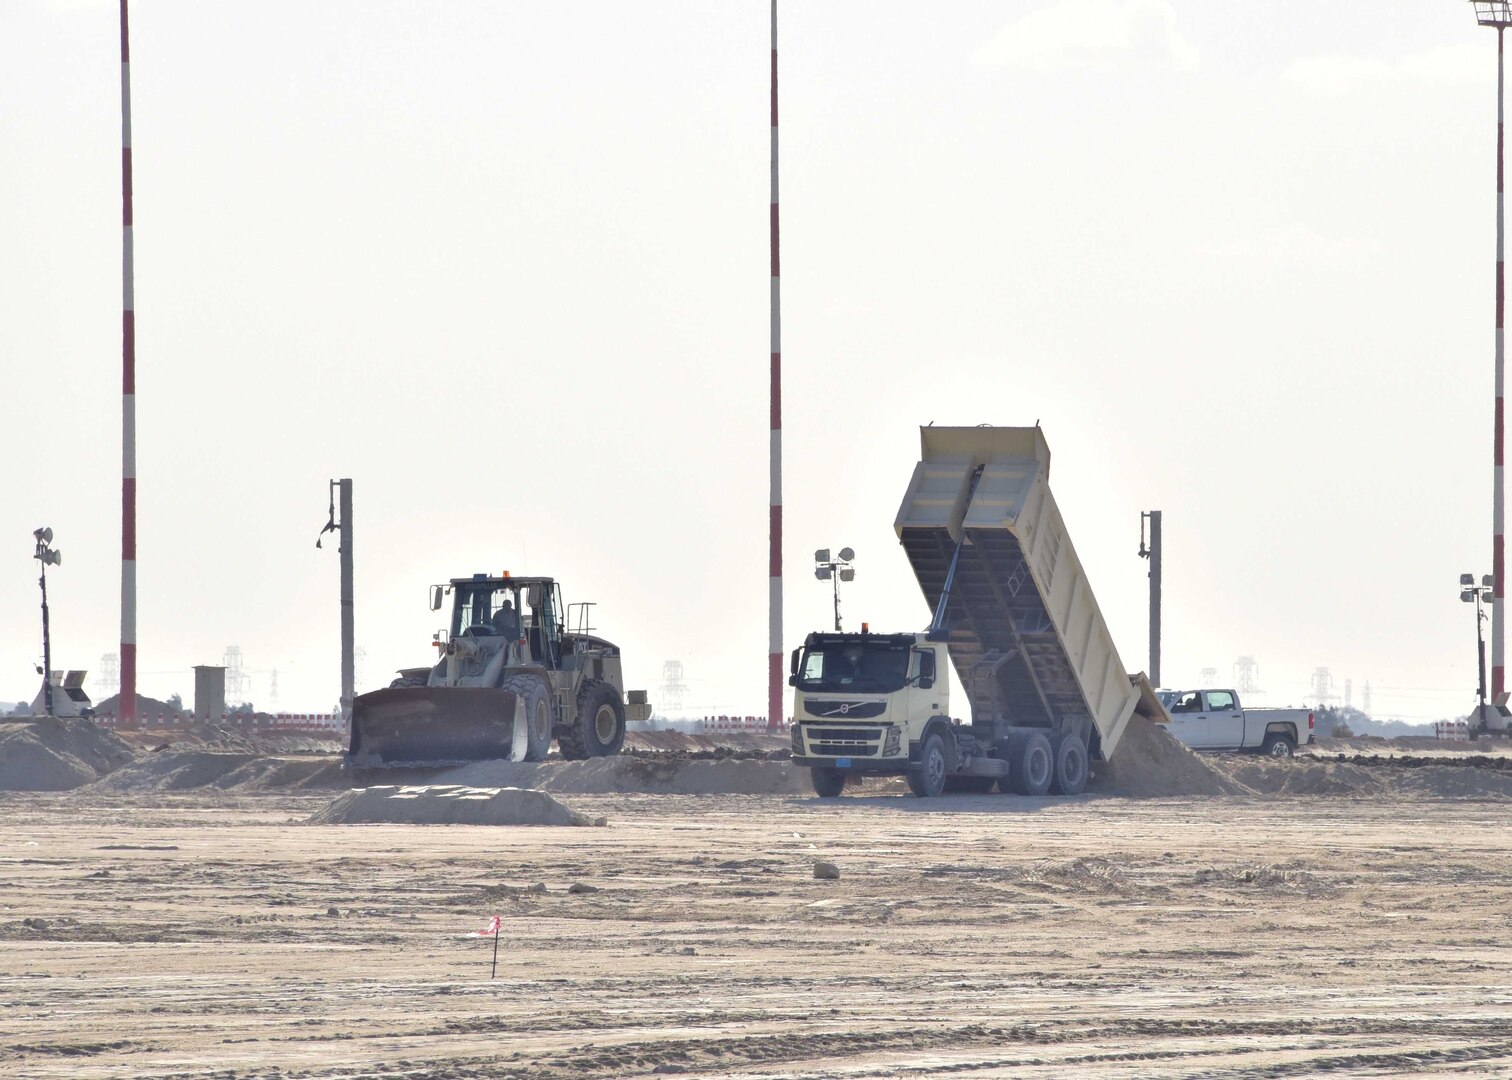 — Construction is currently underway to provide a work environment for U.S. coalition forces to continue aerial port operations in Kuwait City. The aerial port is a strategic logistics point to deliver passengers and cargo throughout the U.S. Central Command area of responsibility and its future was recently put in jeopardy due to a construction project timeline issue.